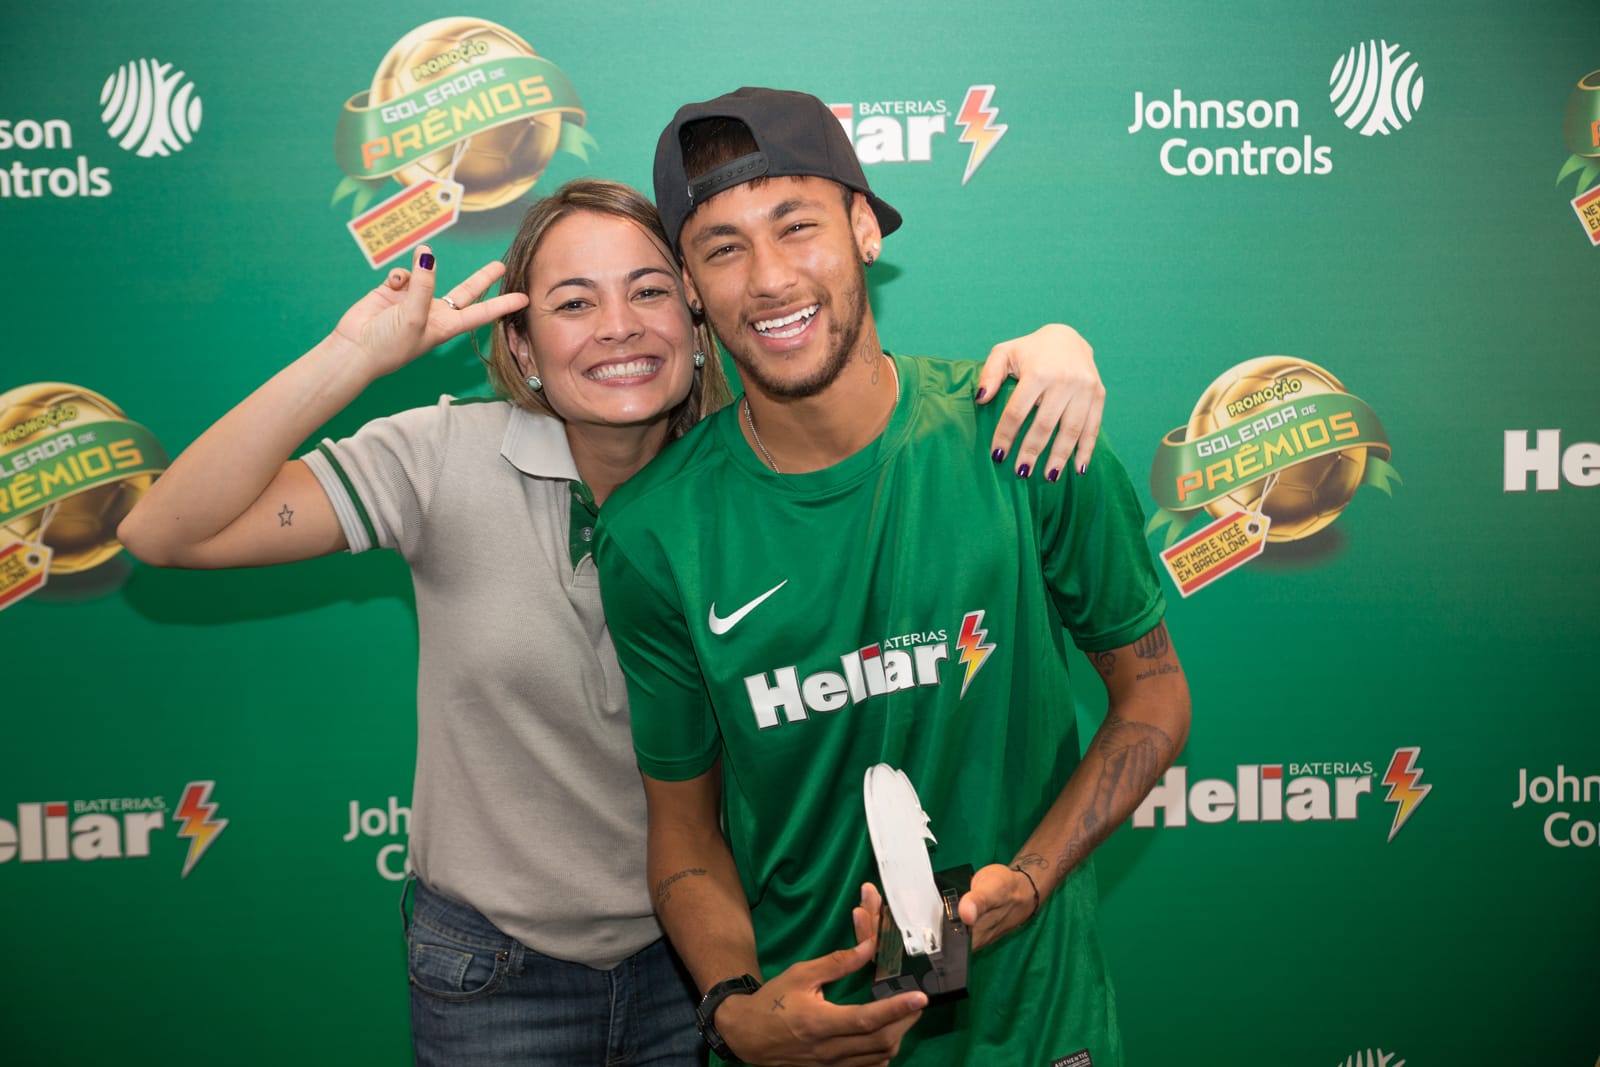 Fan next to a soccer player posing for a photo